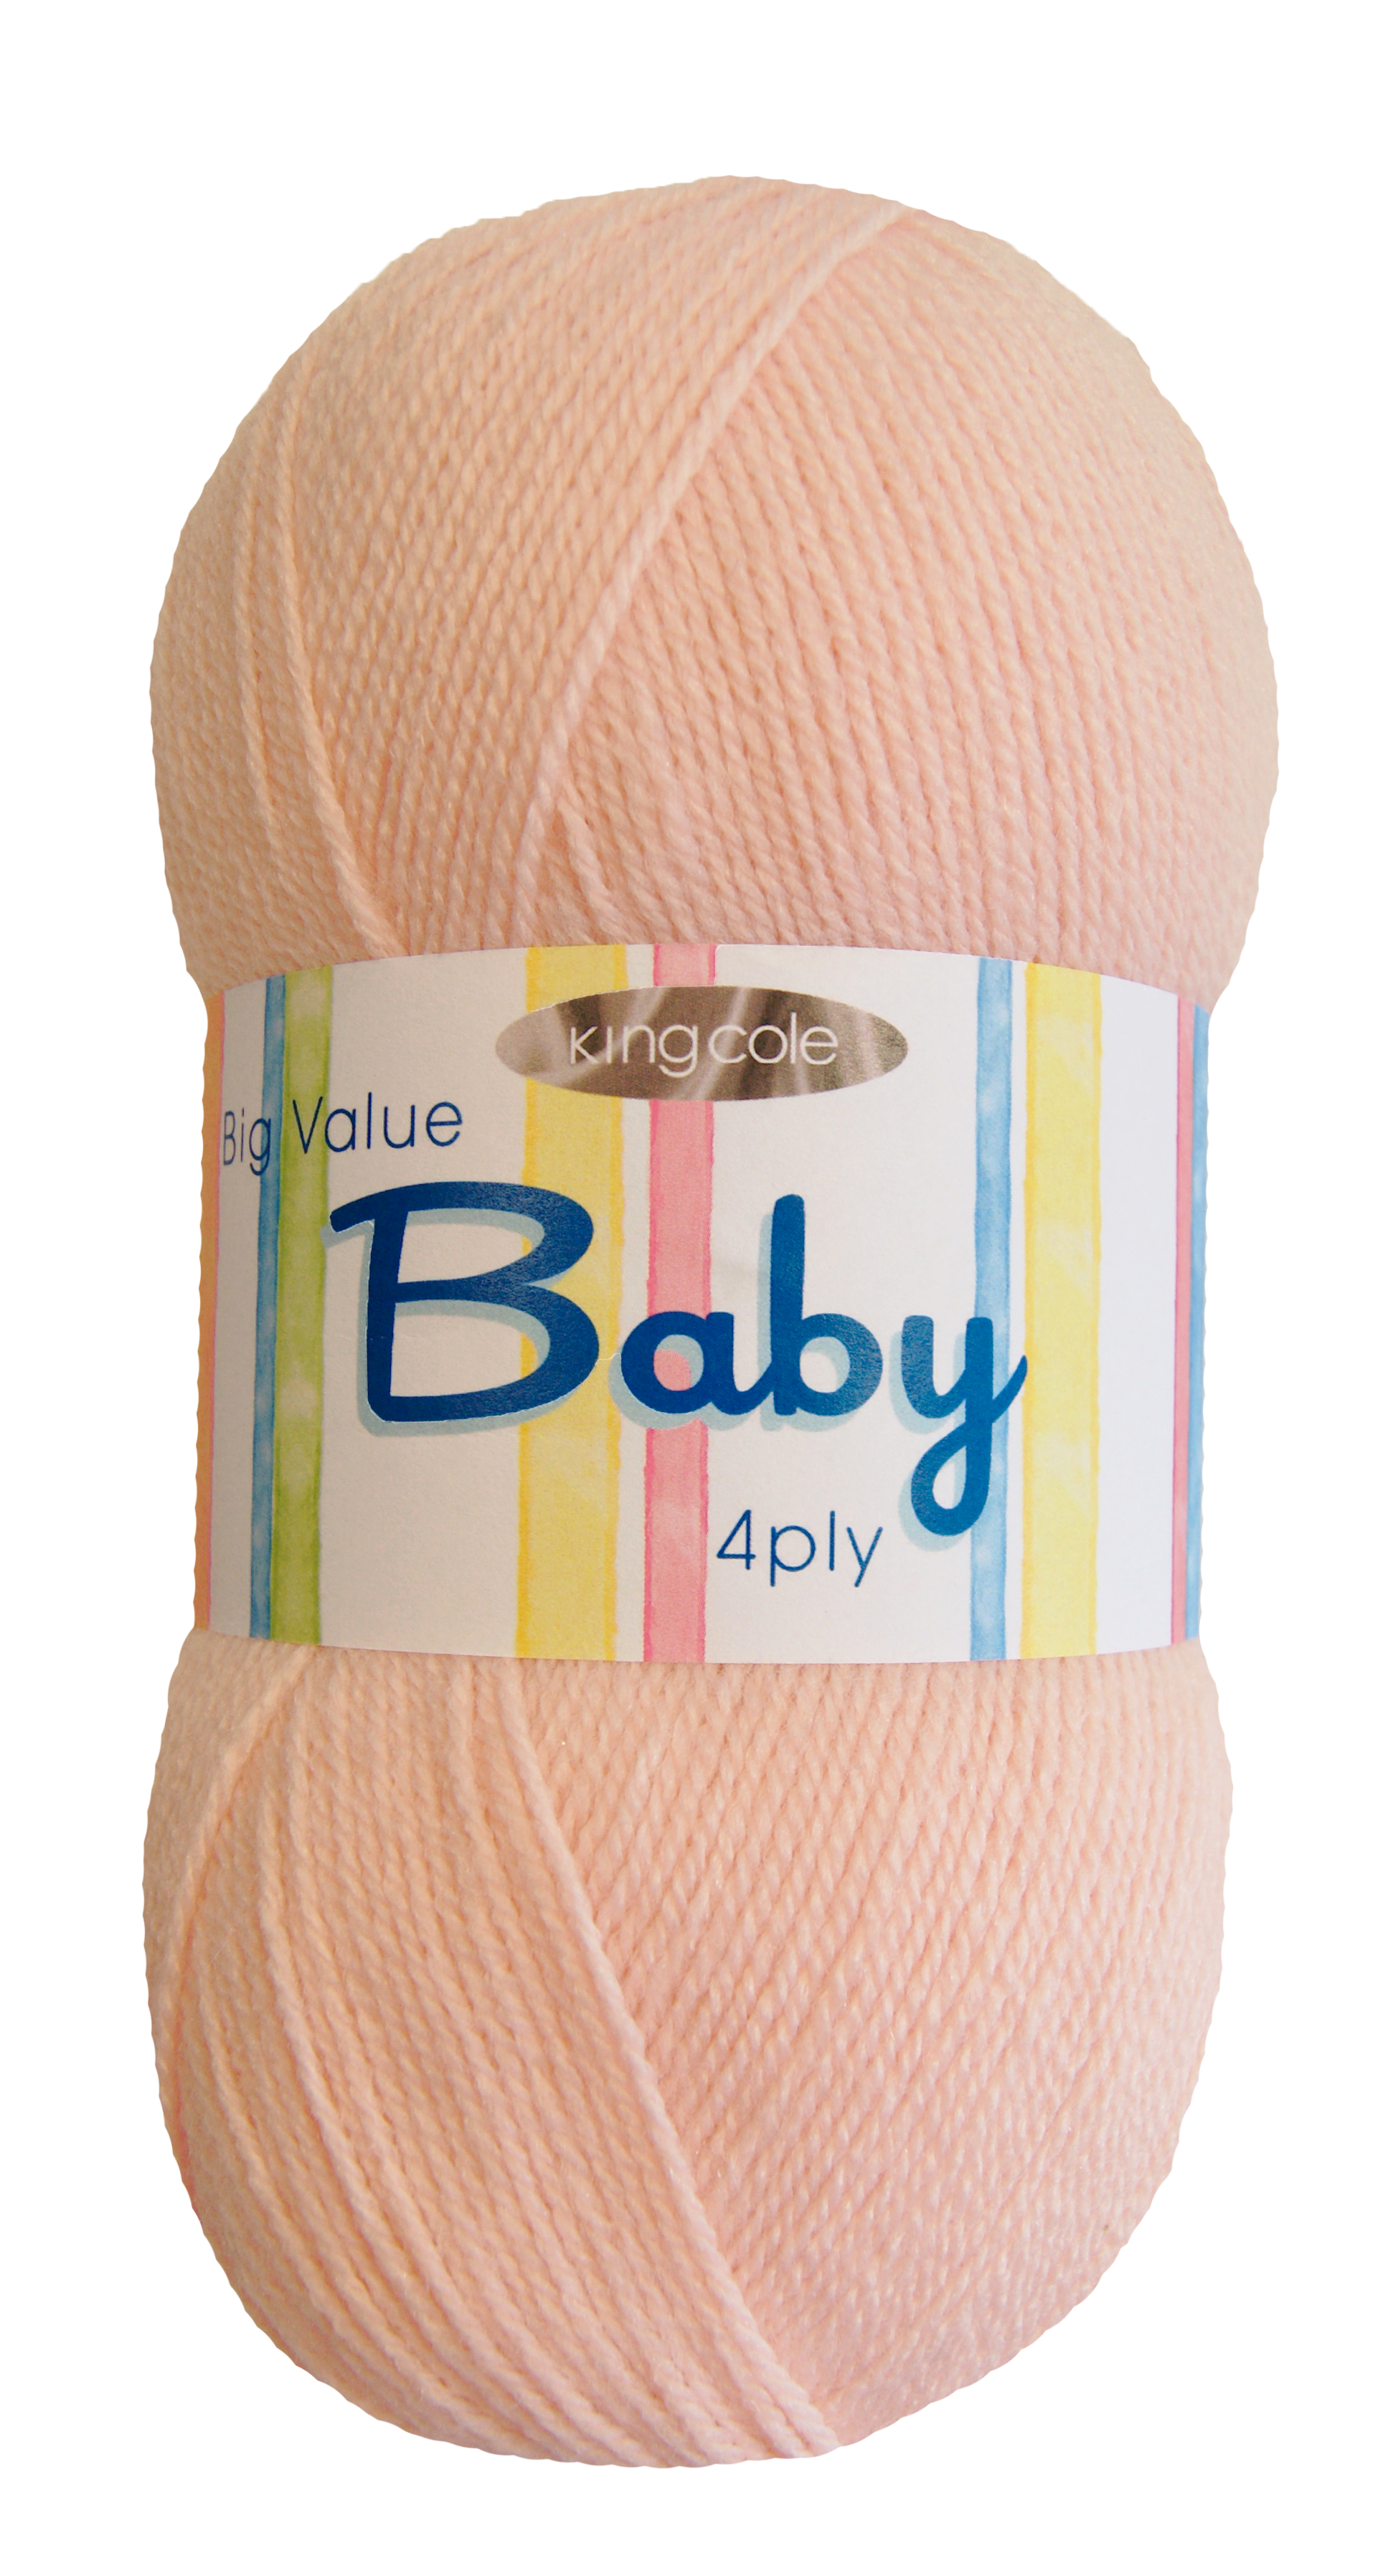 King Cole<P>Big Value Baby 4ply